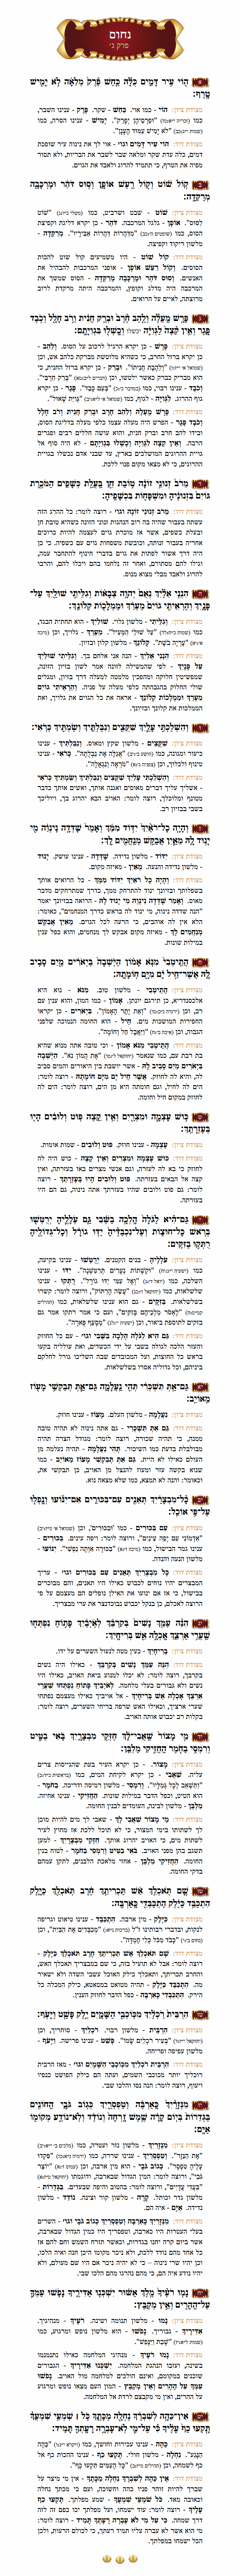 Sefer Nachum Chapter 3 with commentary